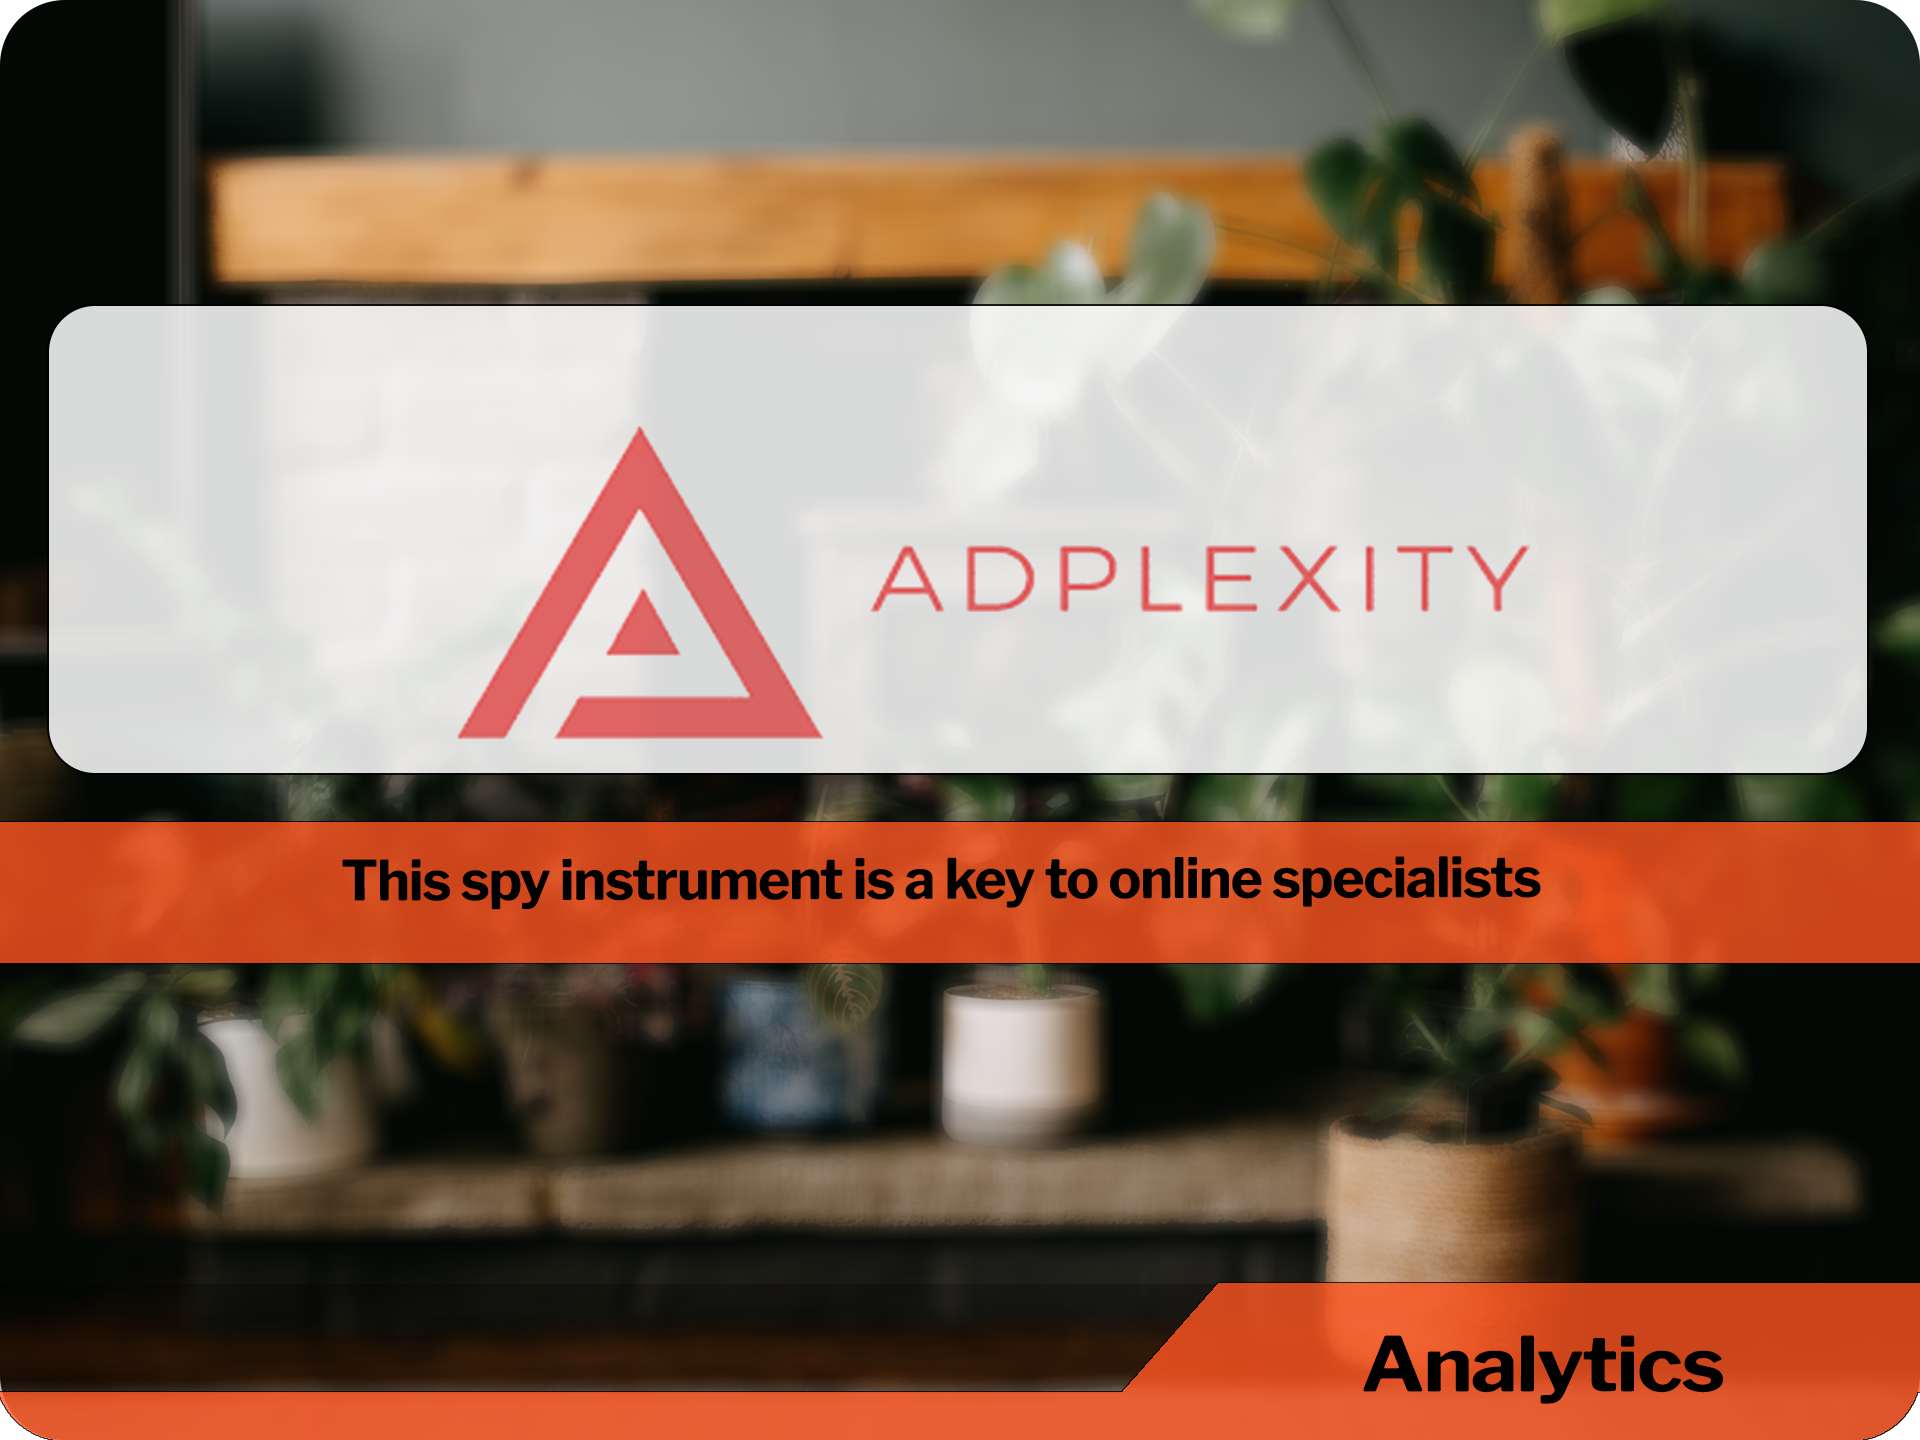 AdPlexity is a lead Tool in the Marketing industry